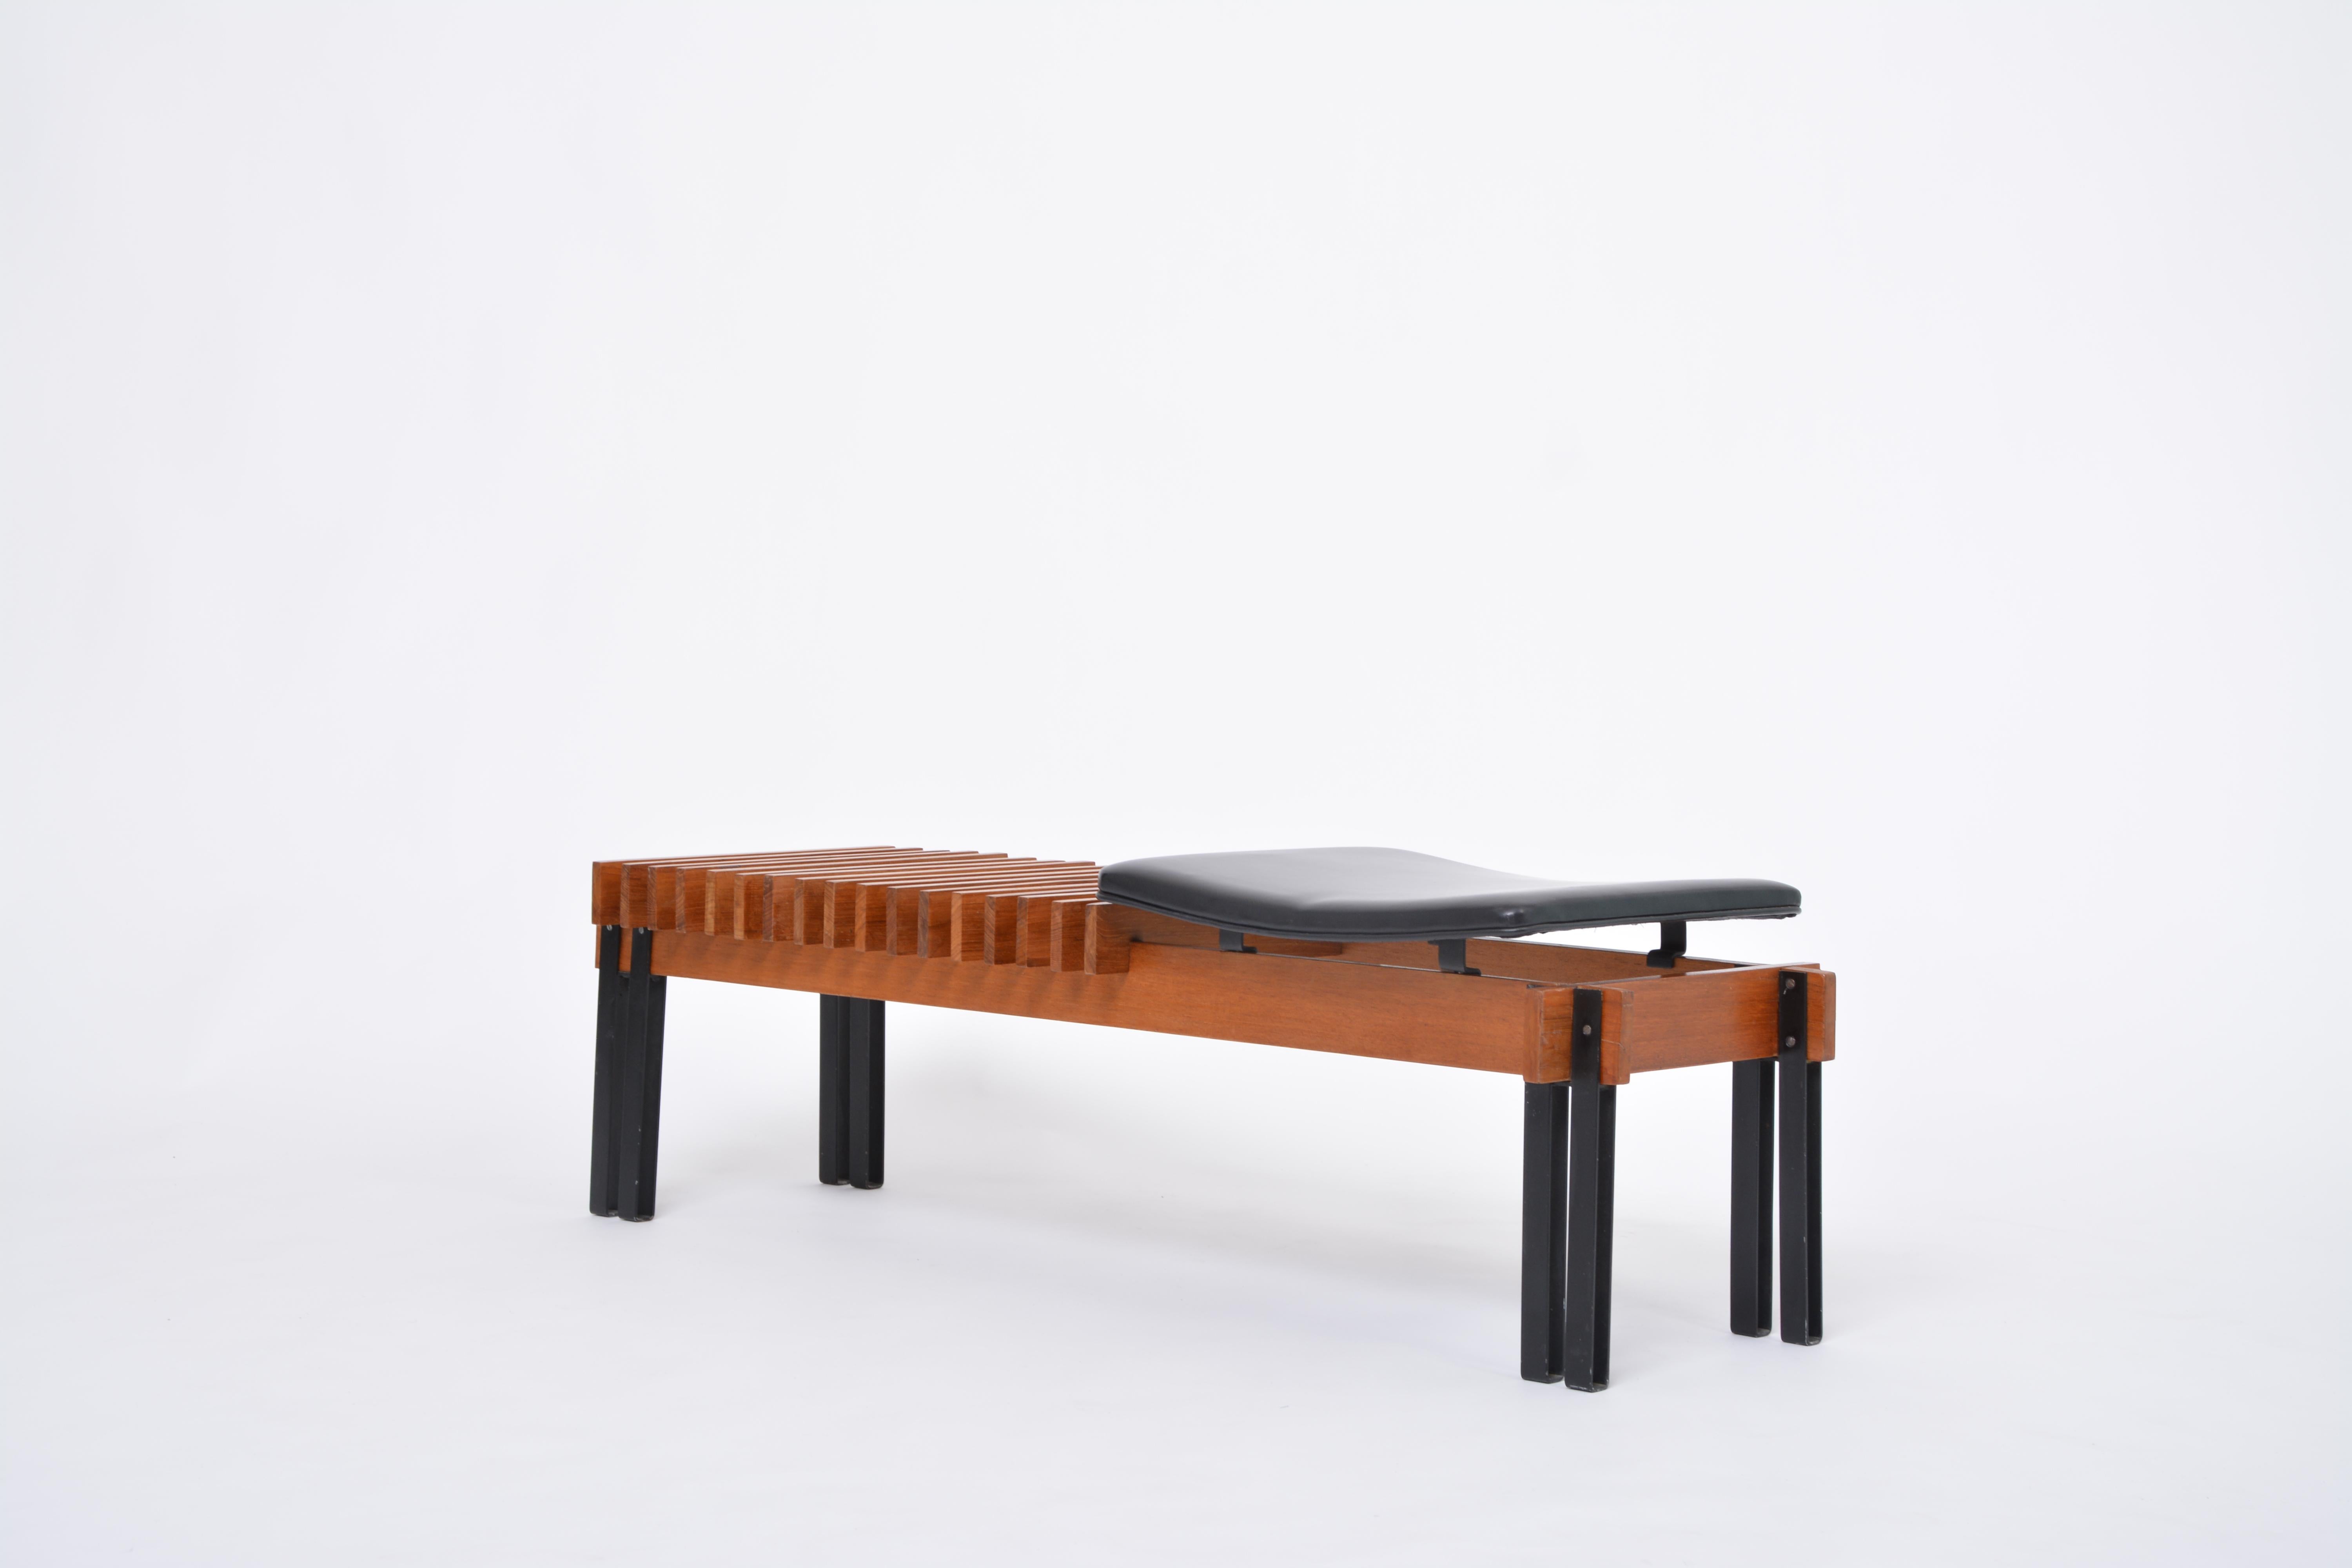 20th Century Mid-Century Modern slatted Teak bench by Inge and Luciano Rubino for Apec For Sale